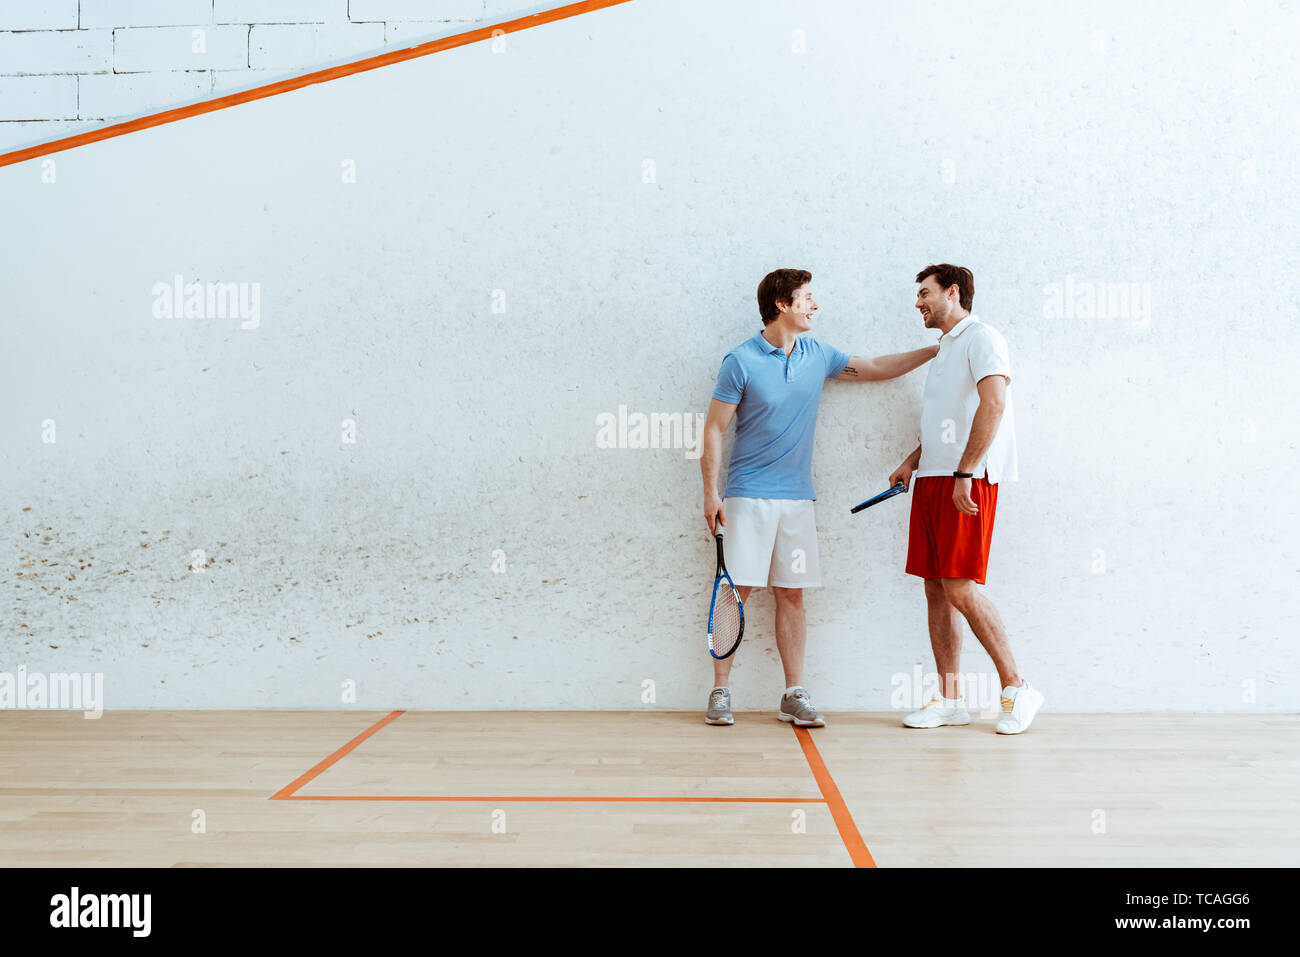 Full length view of squash player putting hand on shoulder of friend Stock Photo